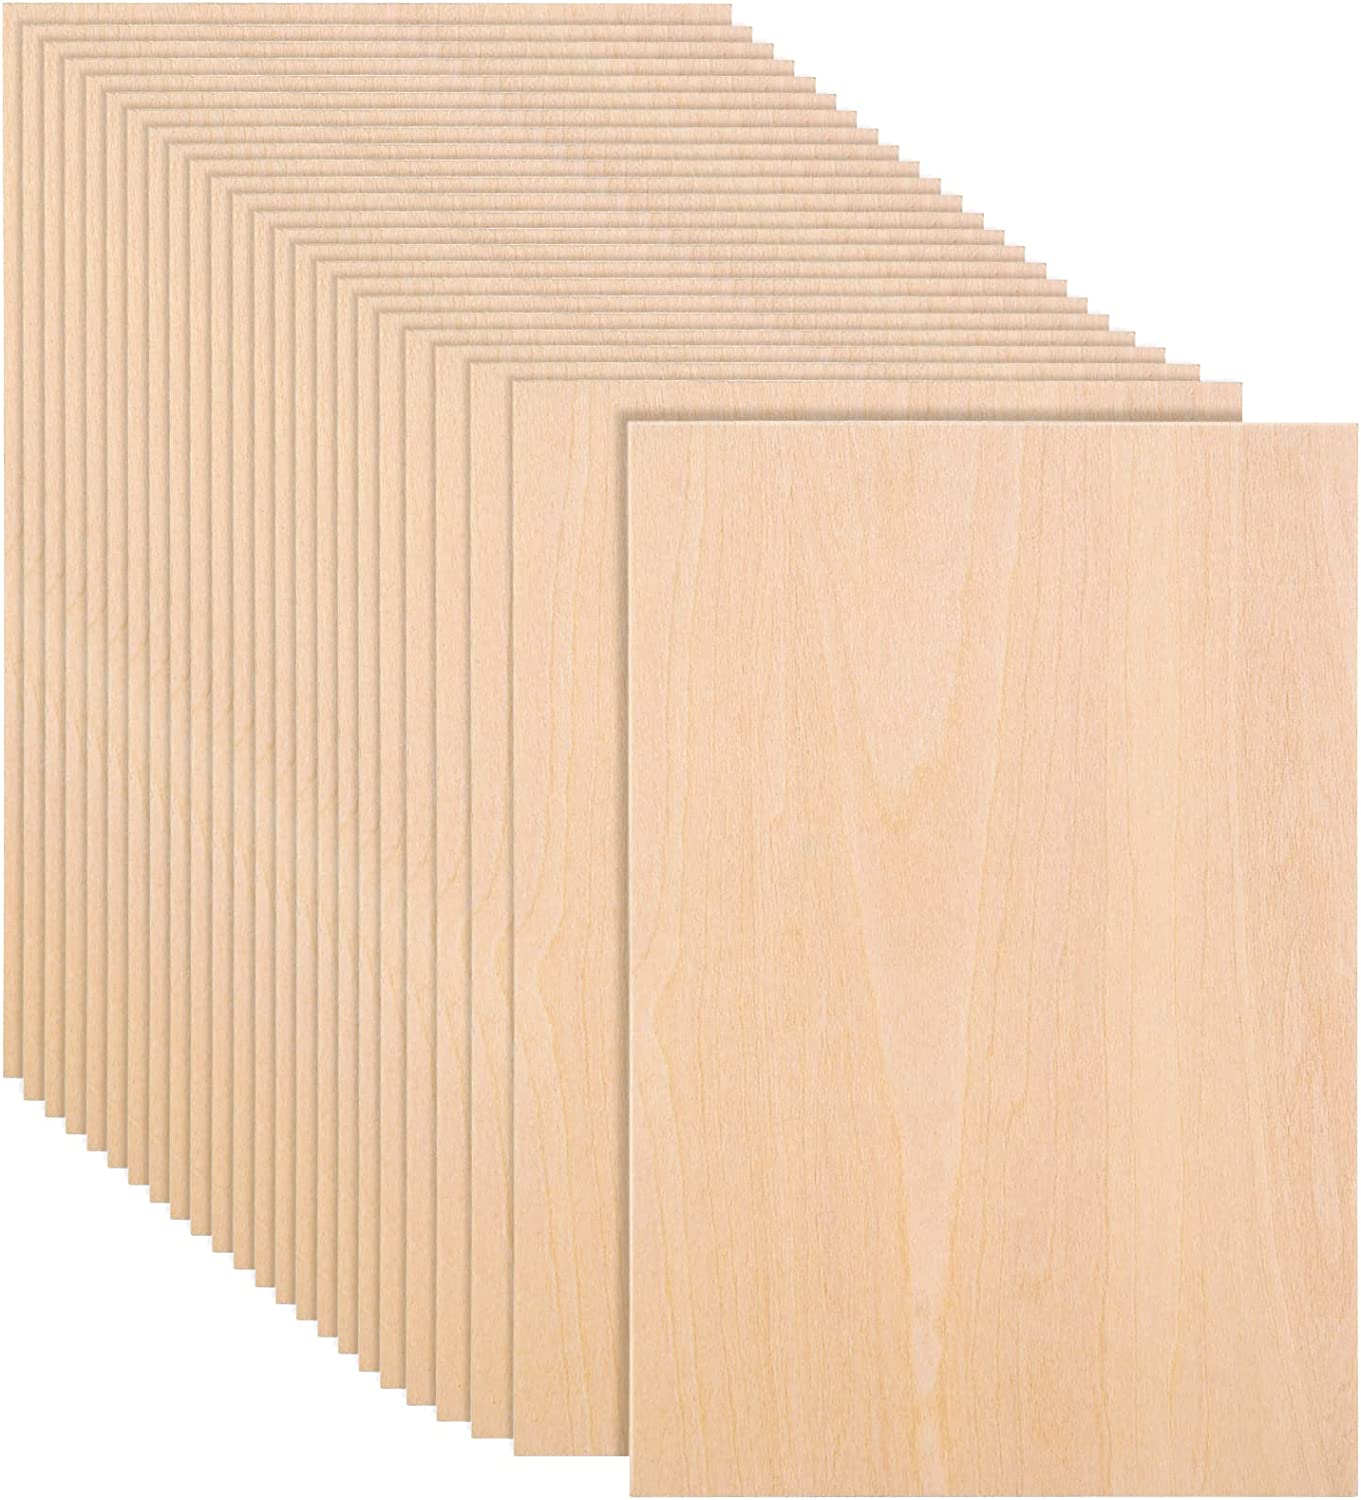 Wholesale Basswood Plywood 1mm 2mm 3mm 4mm 5mm Basswood Sheets for Laser  Cut Cricut DIY Model Craft Toys - China Basswood Plywood Laser, 4mm Plywood  Sheet